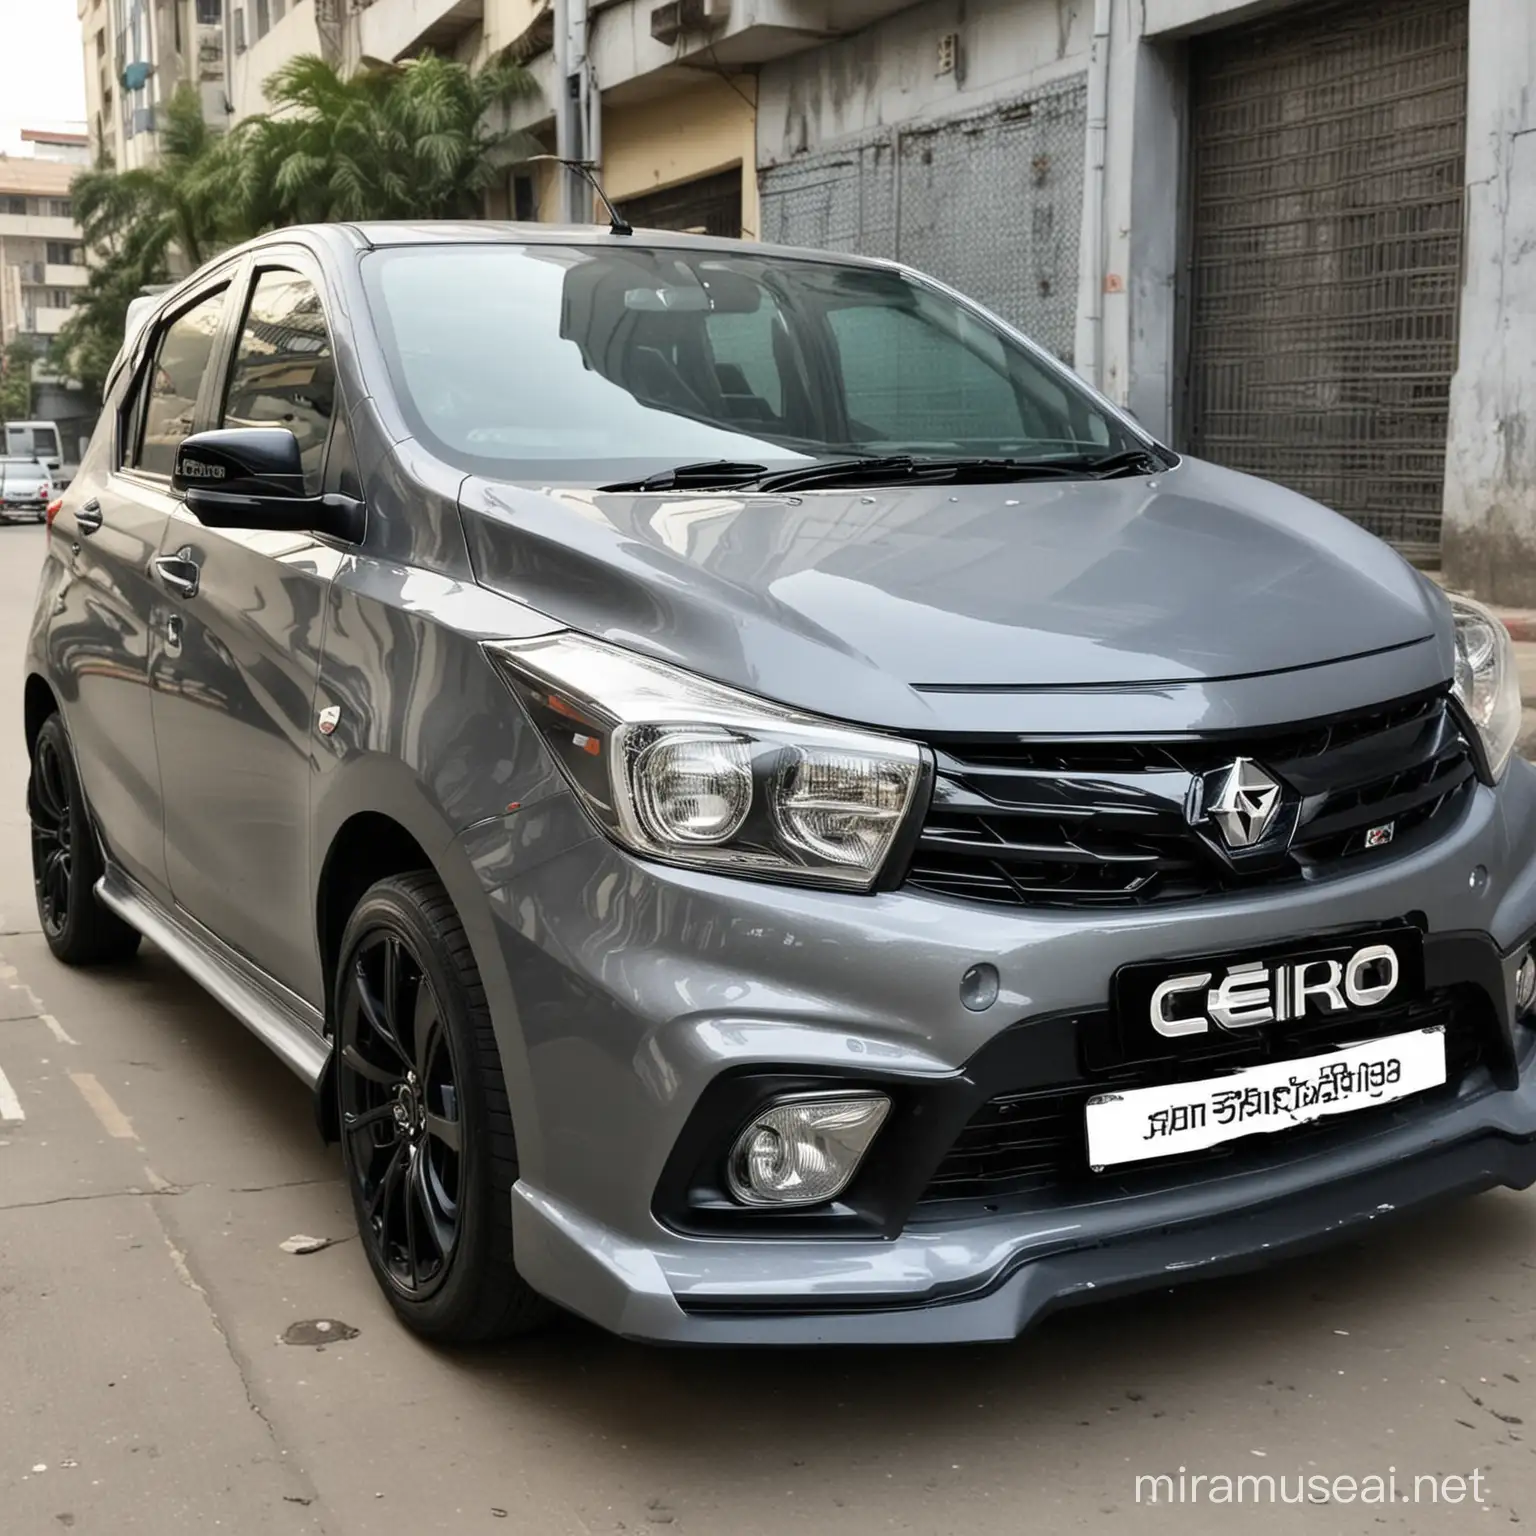 Glossy Grey Celerio with Monster Spoiler and Custom Headlights and Rims